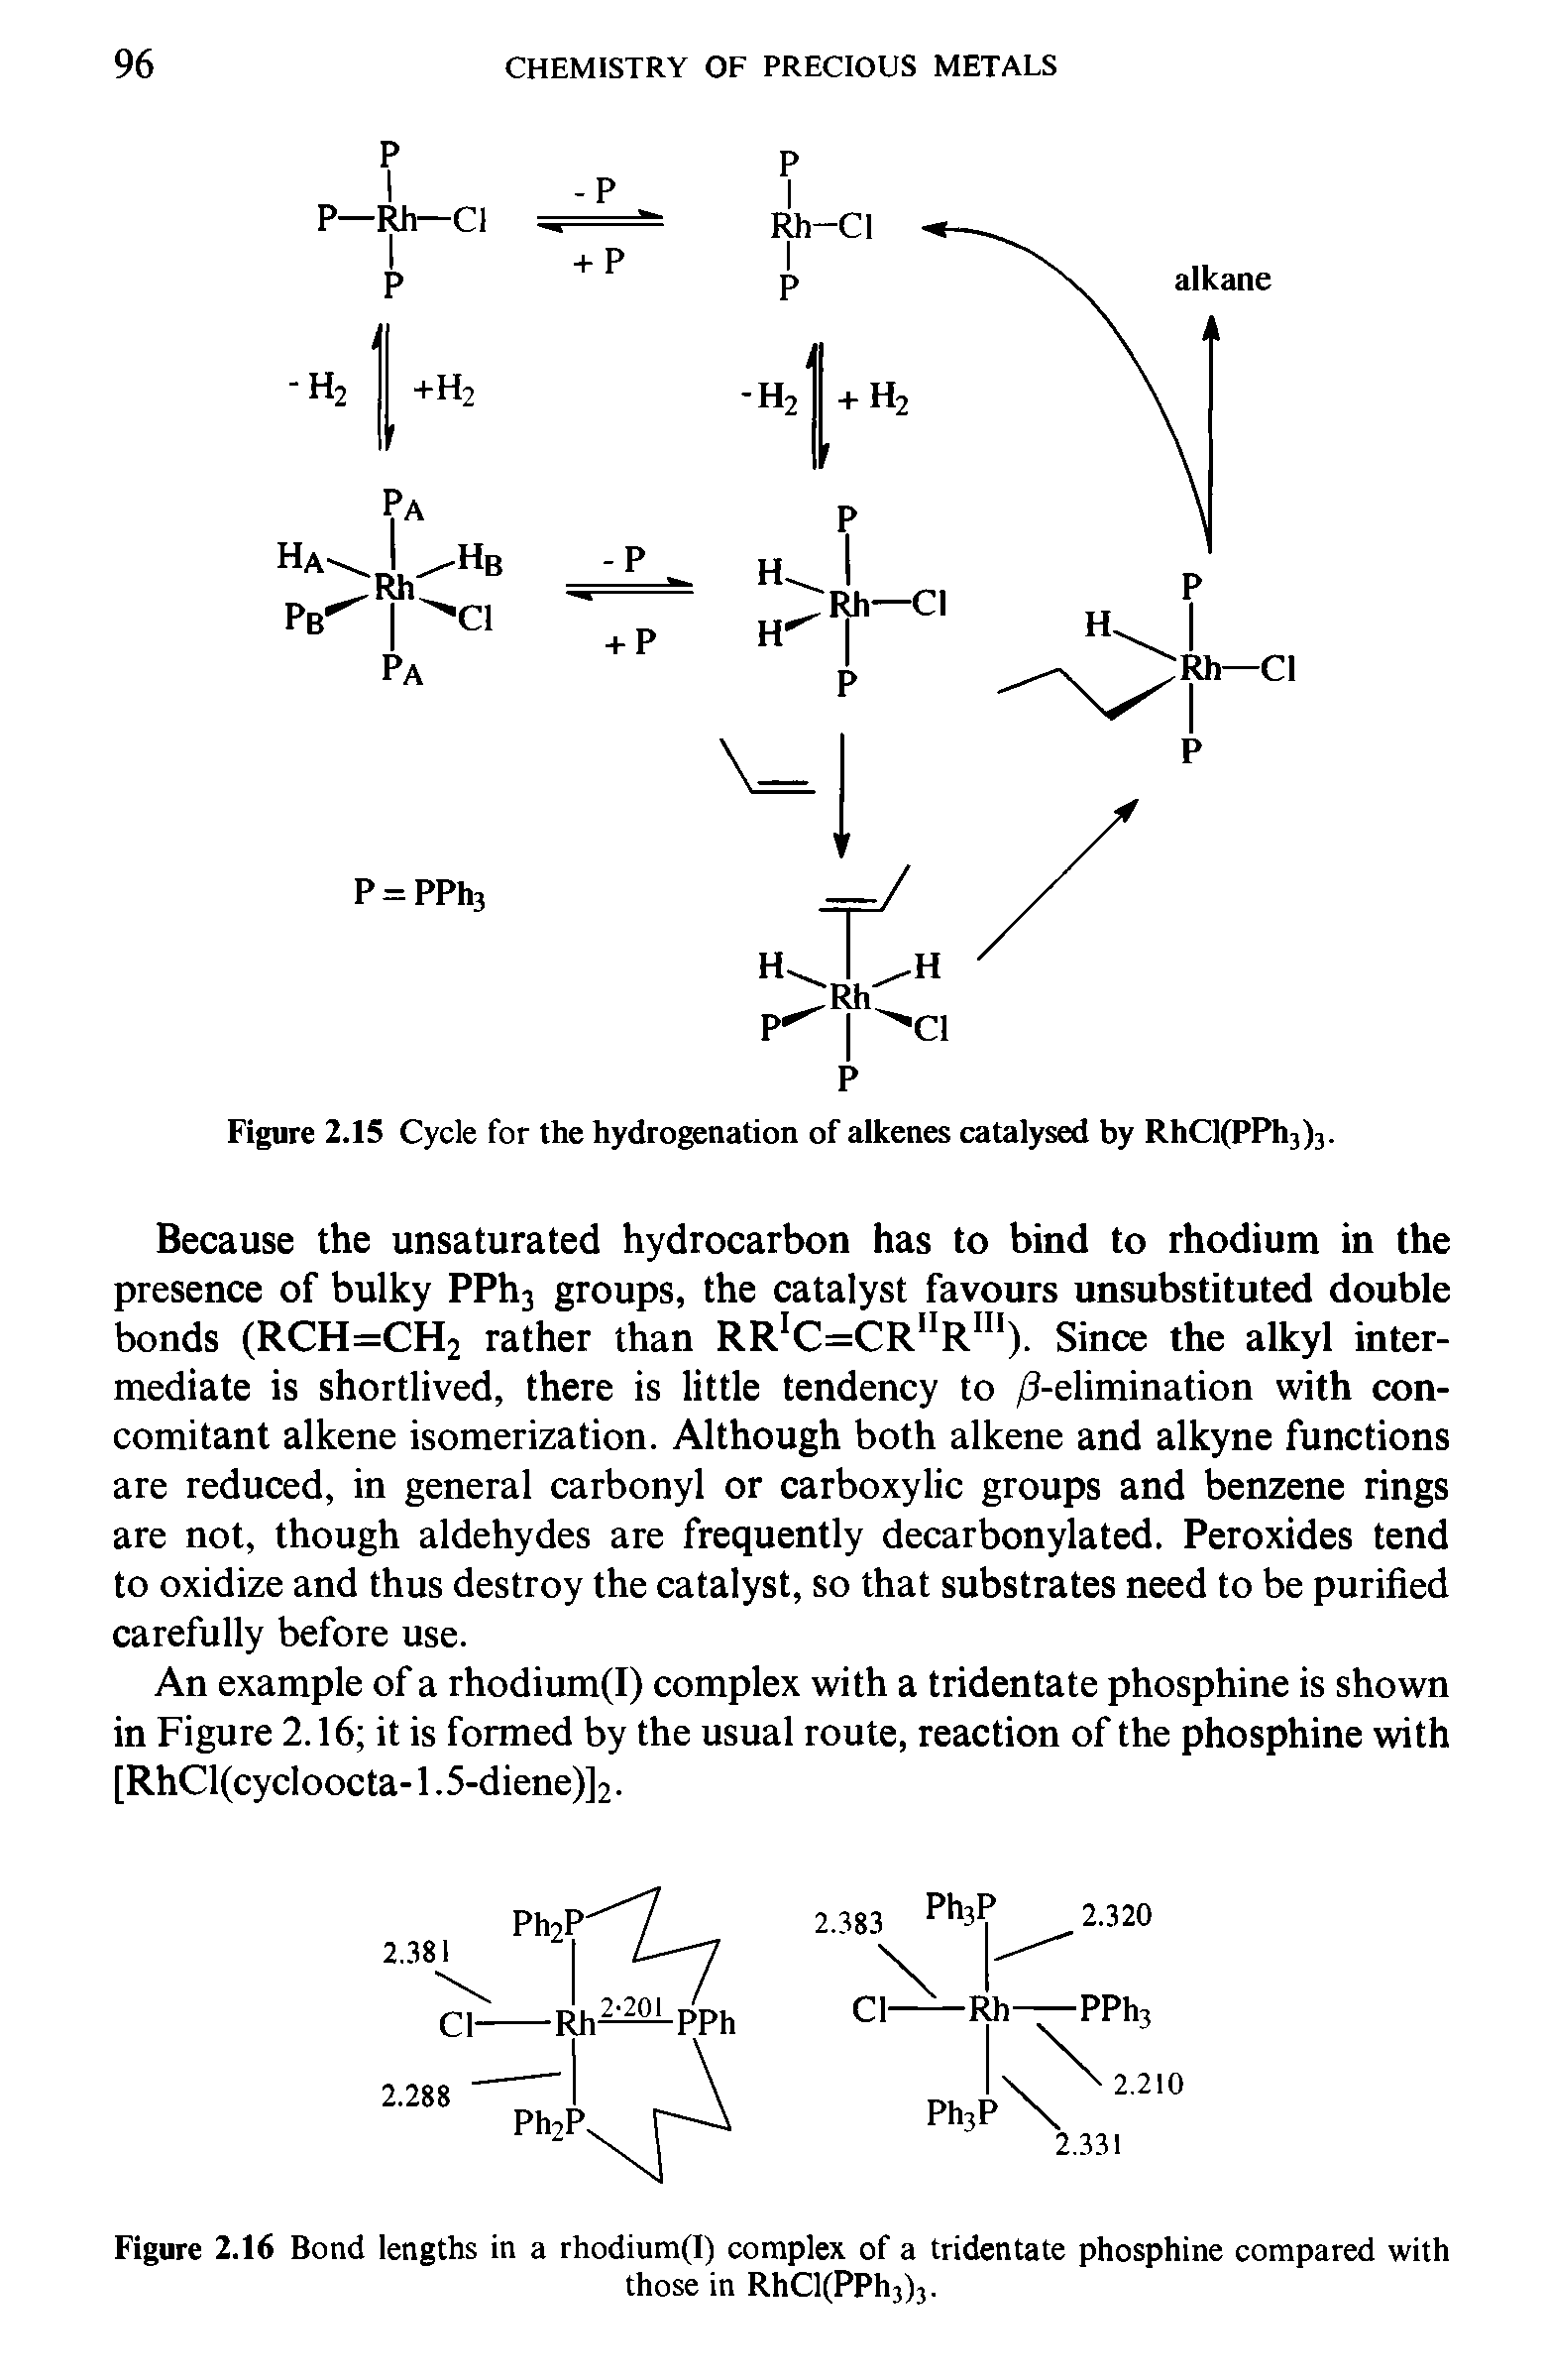 Figure 2.15 Cycle for the hydrogenation of alkenes catalysed by RhCl(PPh3)3.